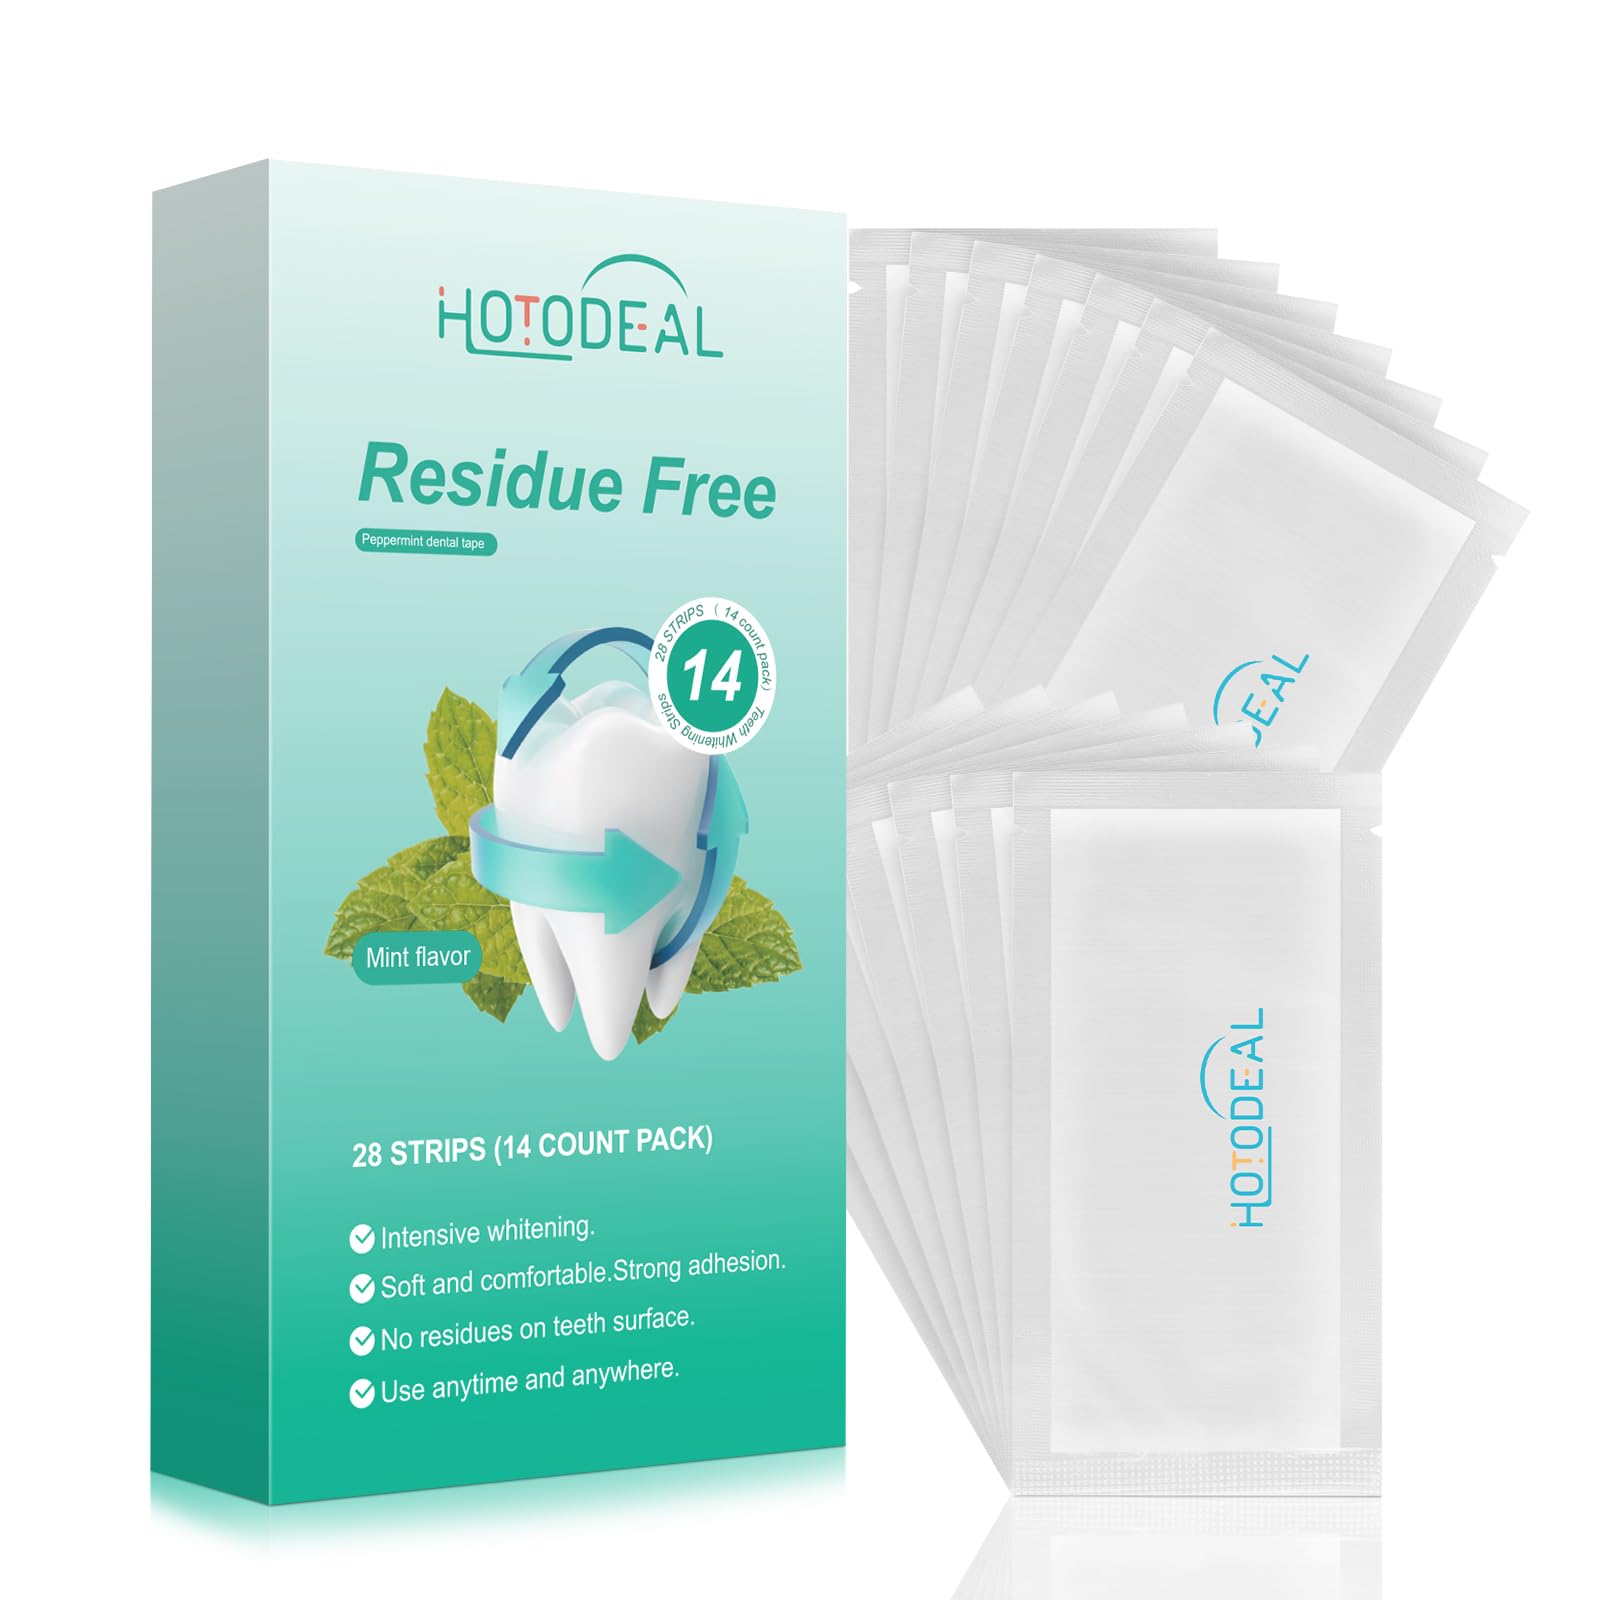 Teeth Whitening Strips- Hotodeal Teeth Whitener for Remove Coffee Tea Smoking Stains and Other Stains